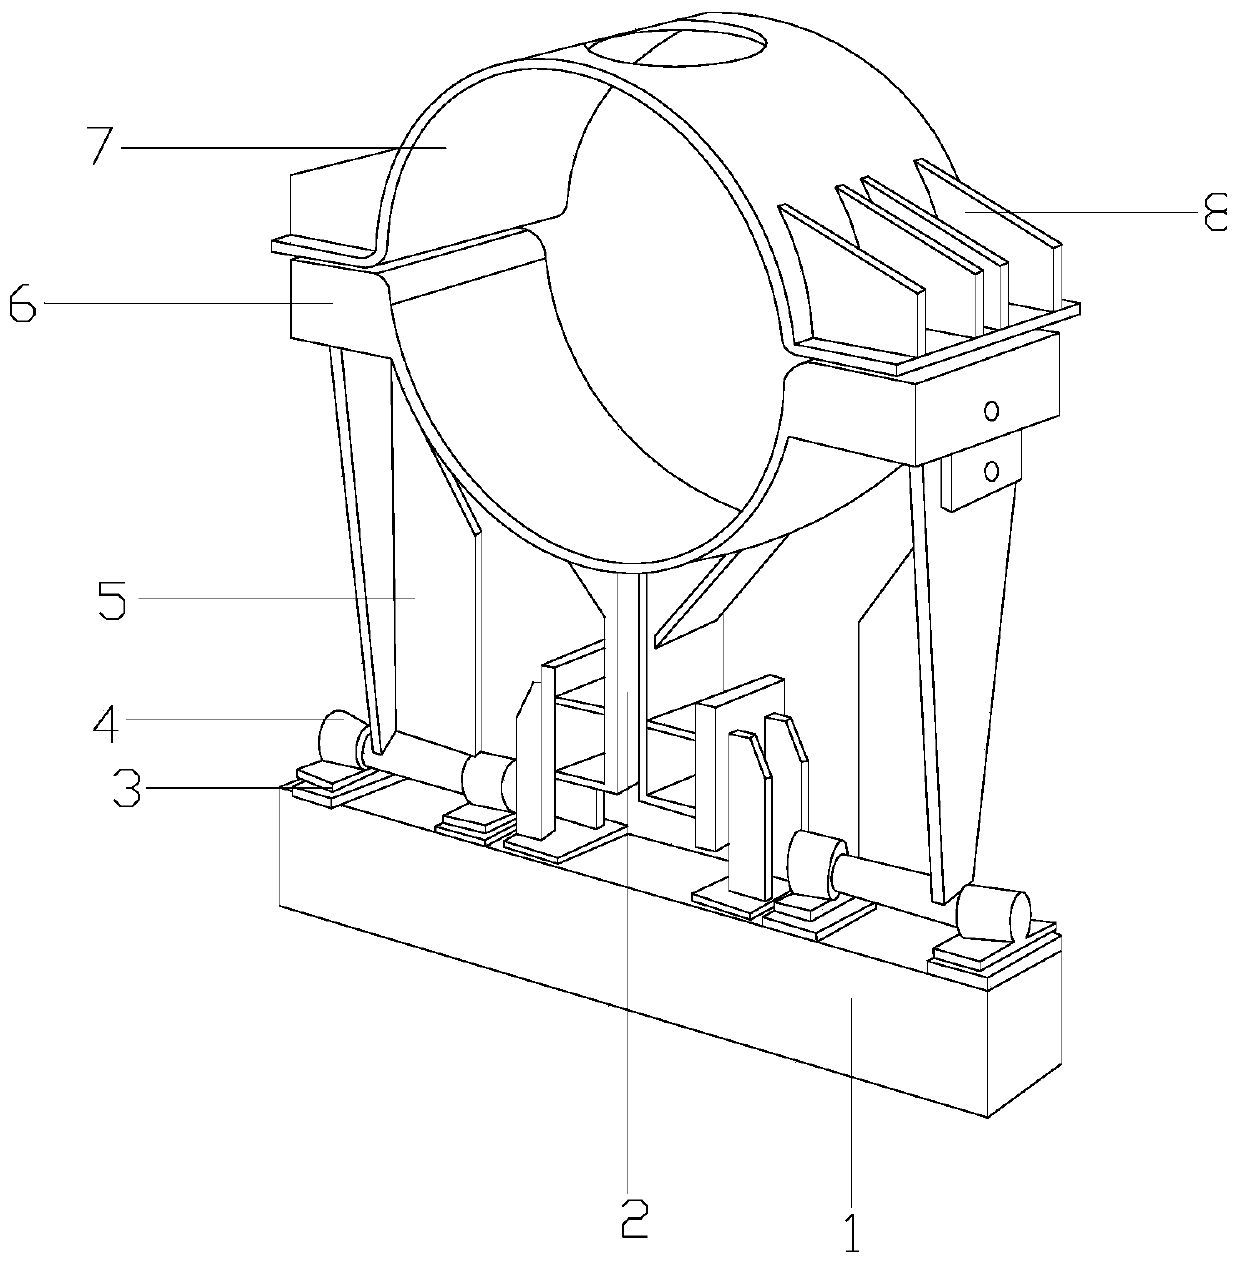 A petrochemical pipeline support device